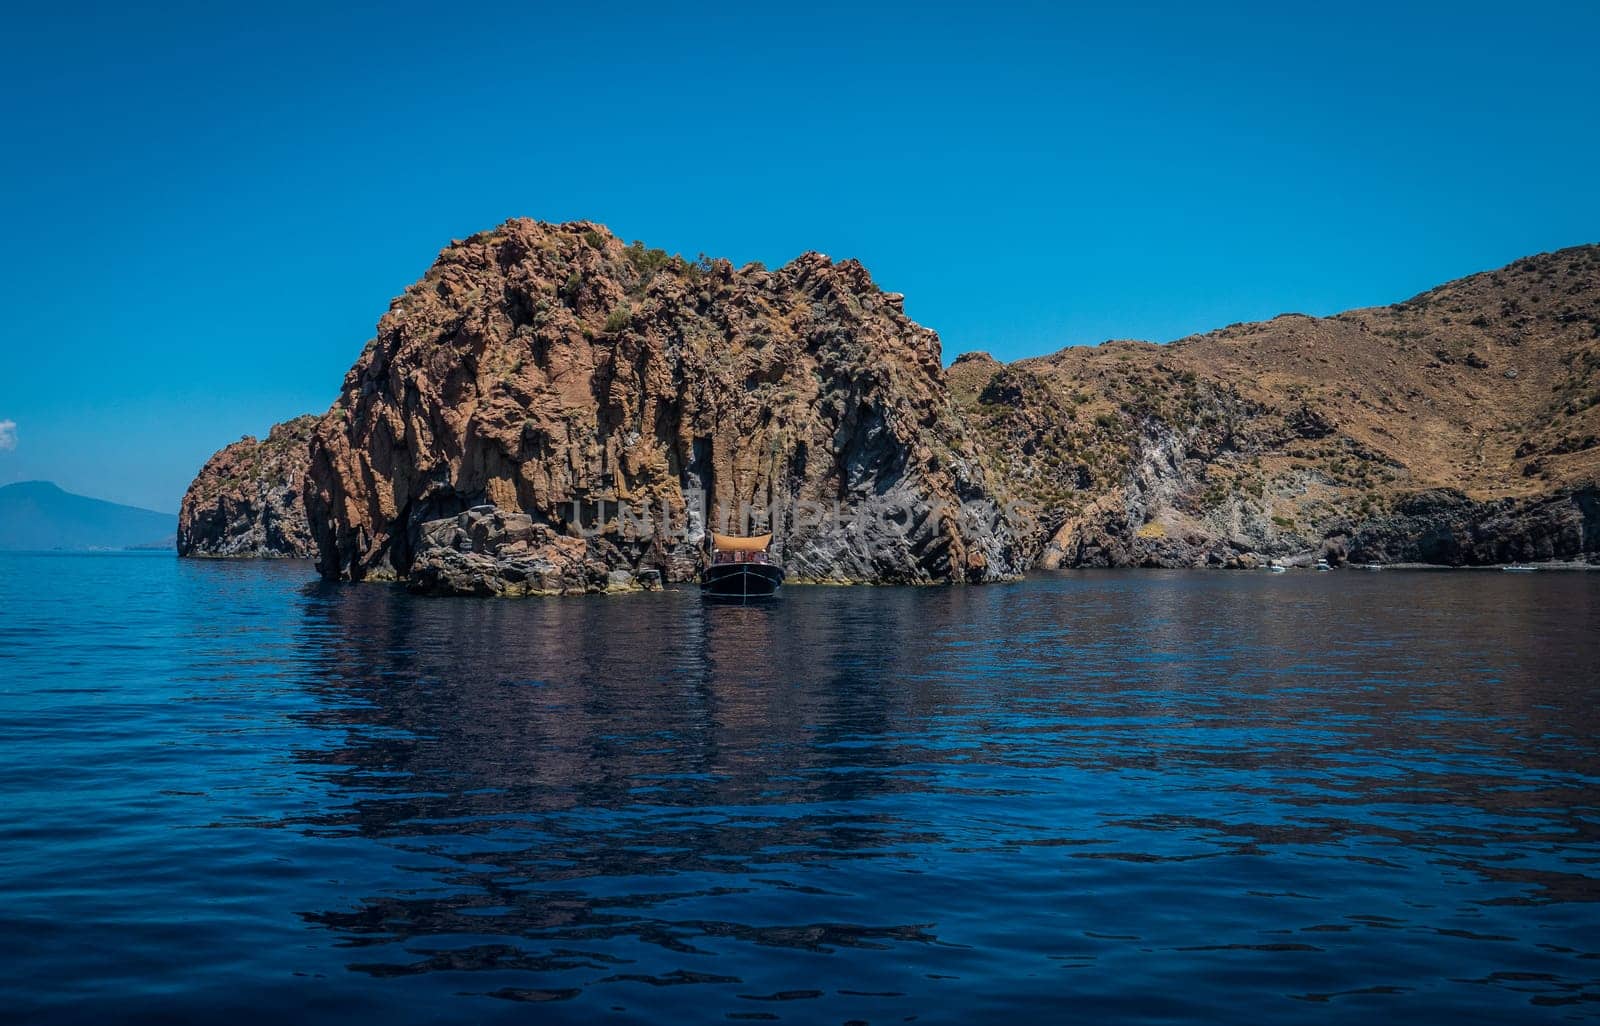 A small boat in the middle of a body of water. Photo of a serene boat floating in the crystal clear waters of Sicily's Eolie Islands